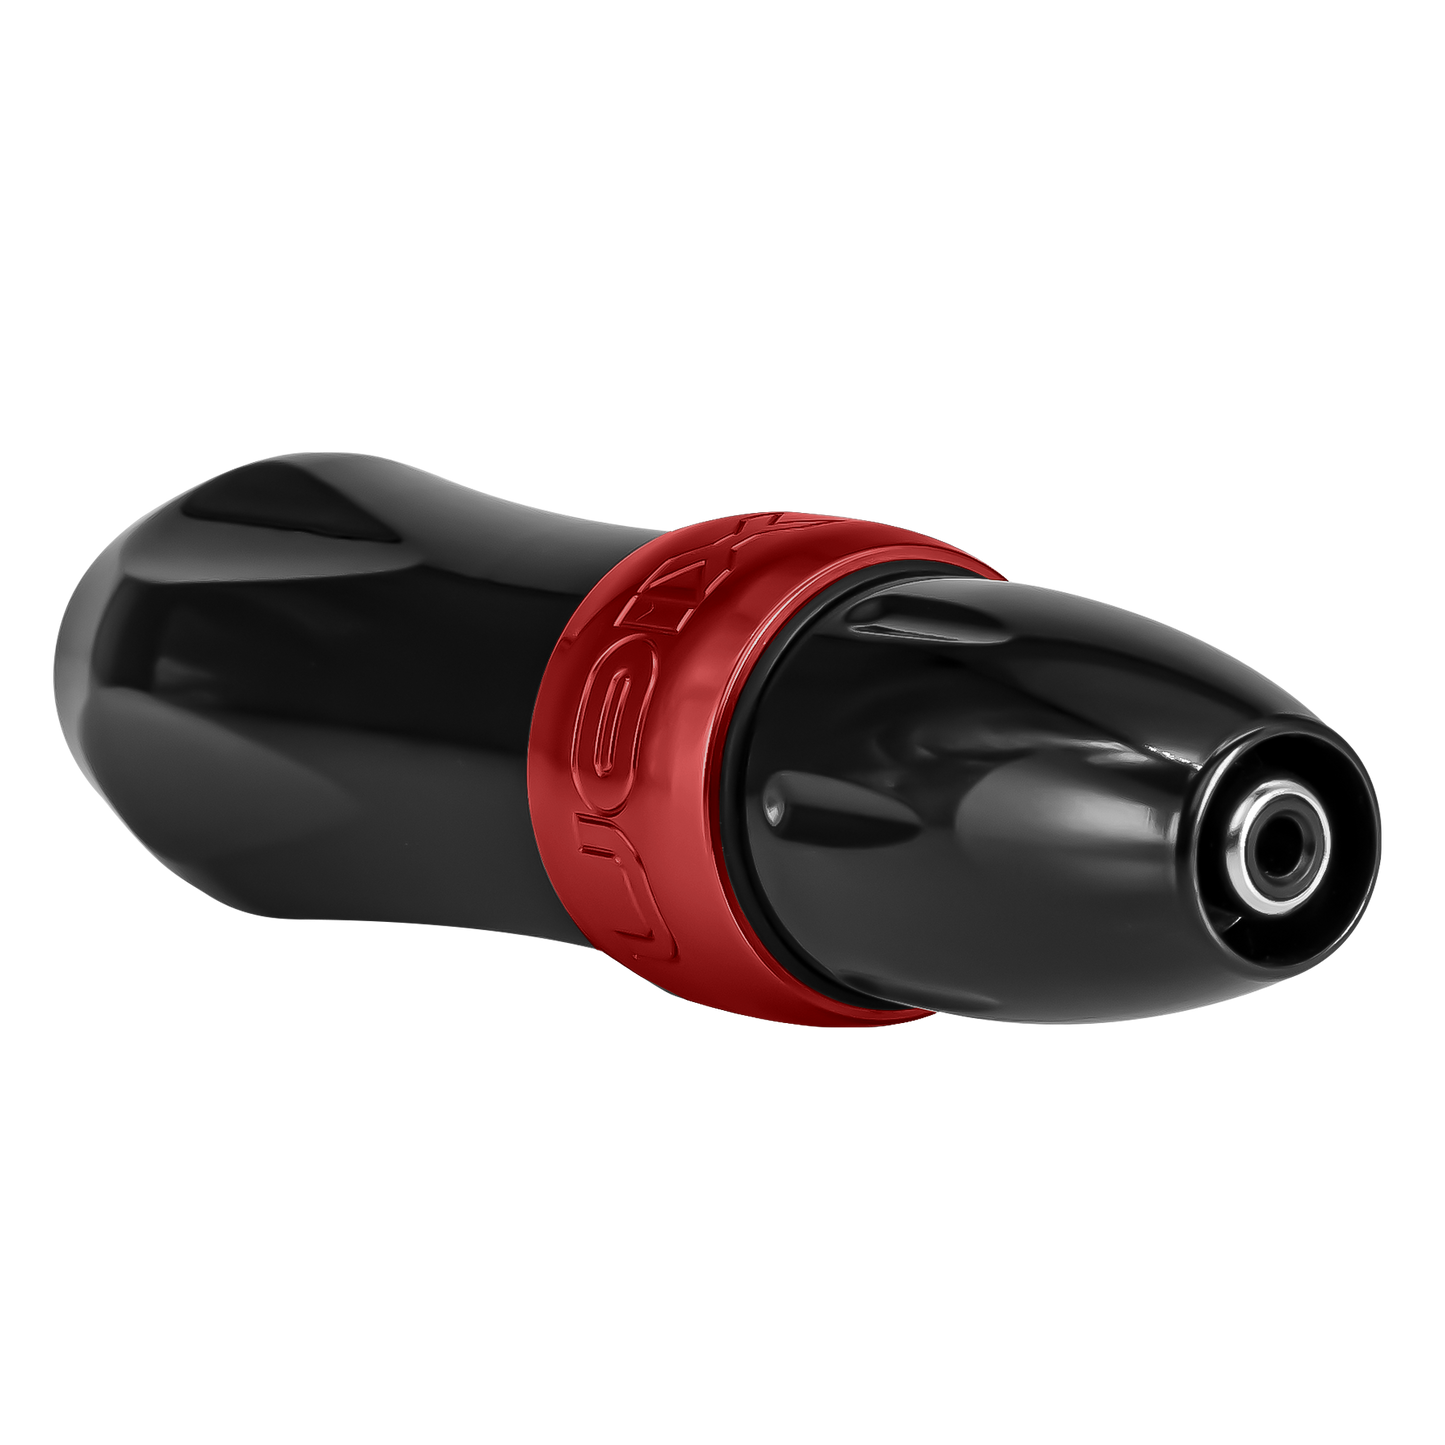 Spektra Xion in special edition black and ruby red, in a view showing the connector